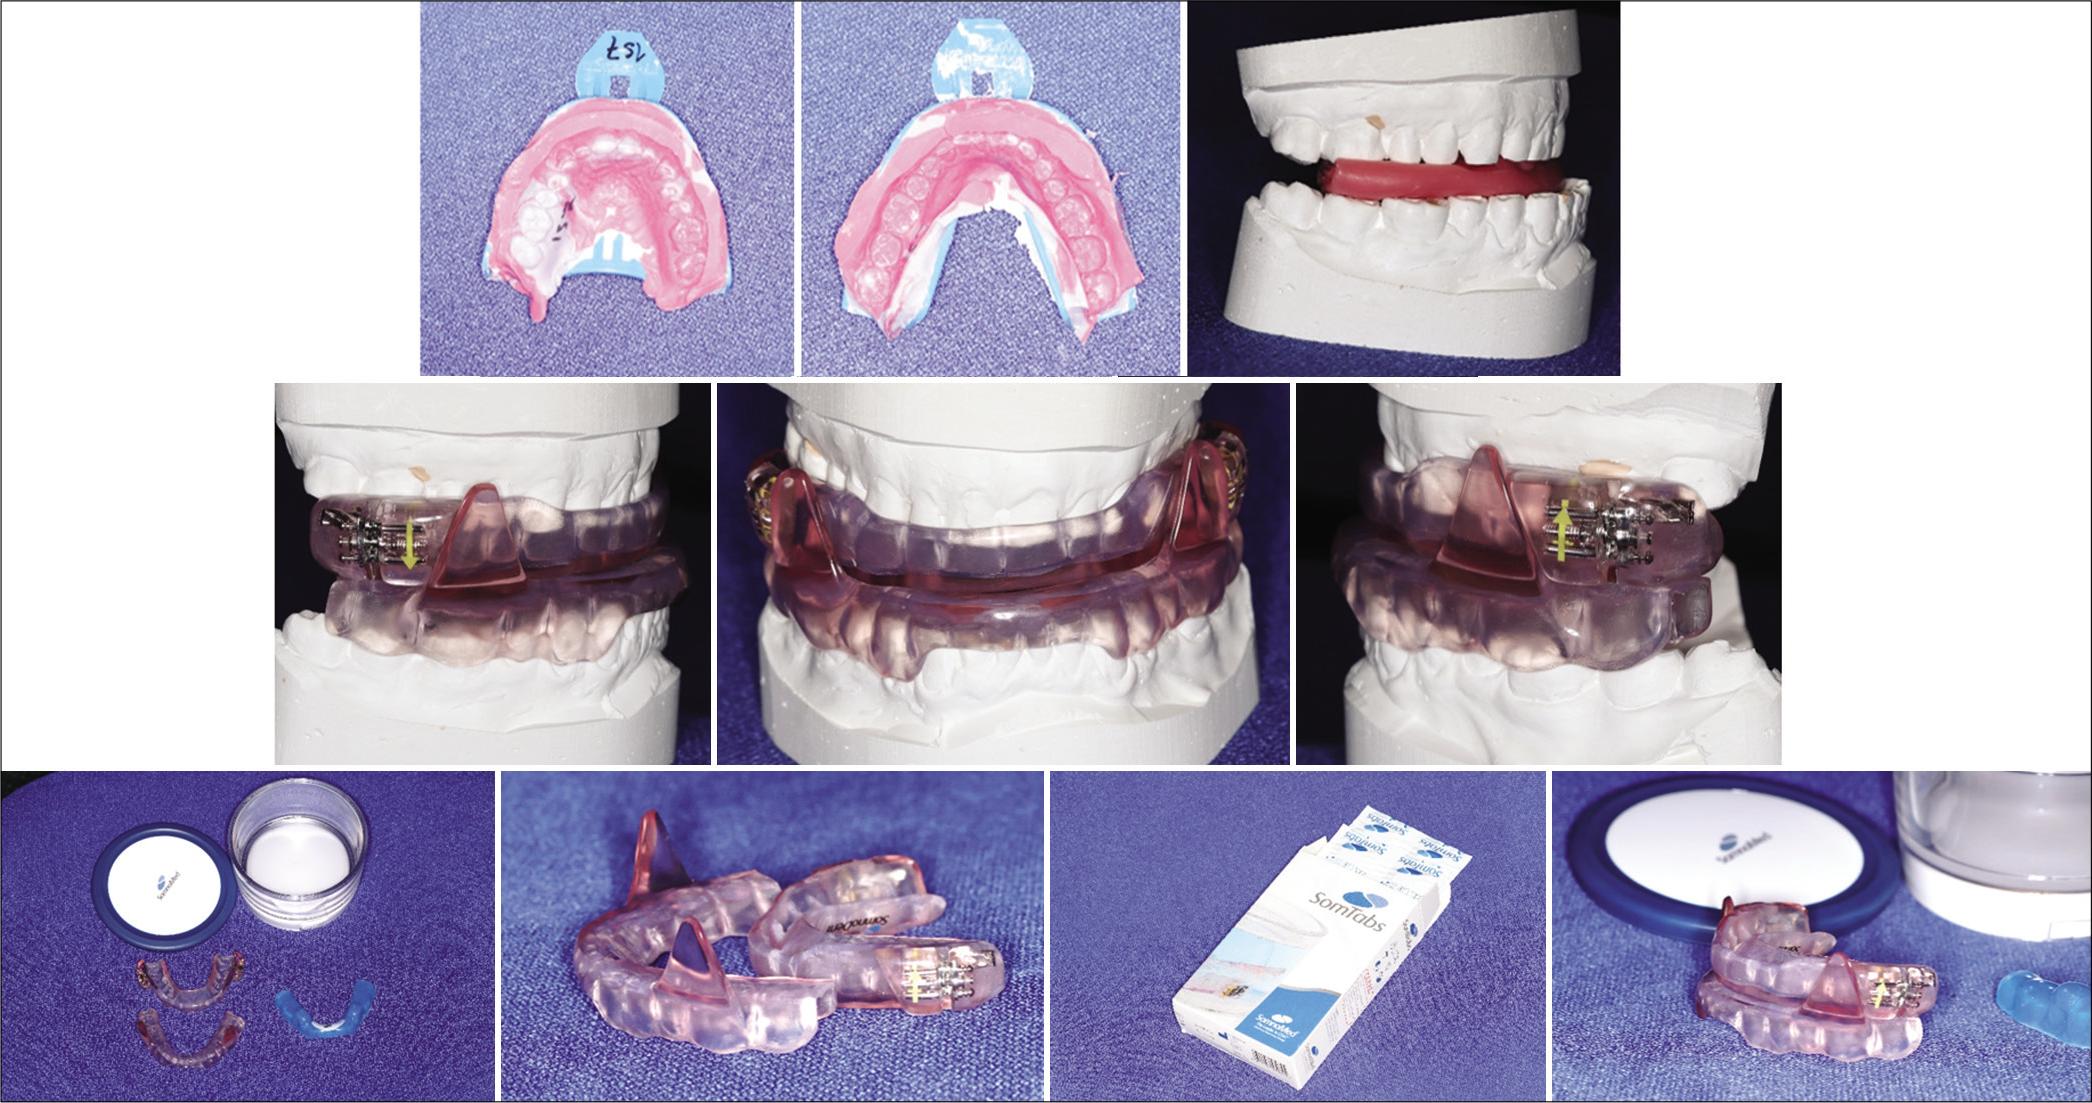 A bite registration is made for the fabrication of mandibular advancement splint (MAS). The MAS, like SomnoMed (SomnoMed, SomnoDent MAS; SomnoMed Ltd, Crows Nest, Australia), is convenient to adjust as it is fitted with an adjustment screw that aids the patient to locate the best possible jaw position to control the symptoms of obstructive sleep apnea.